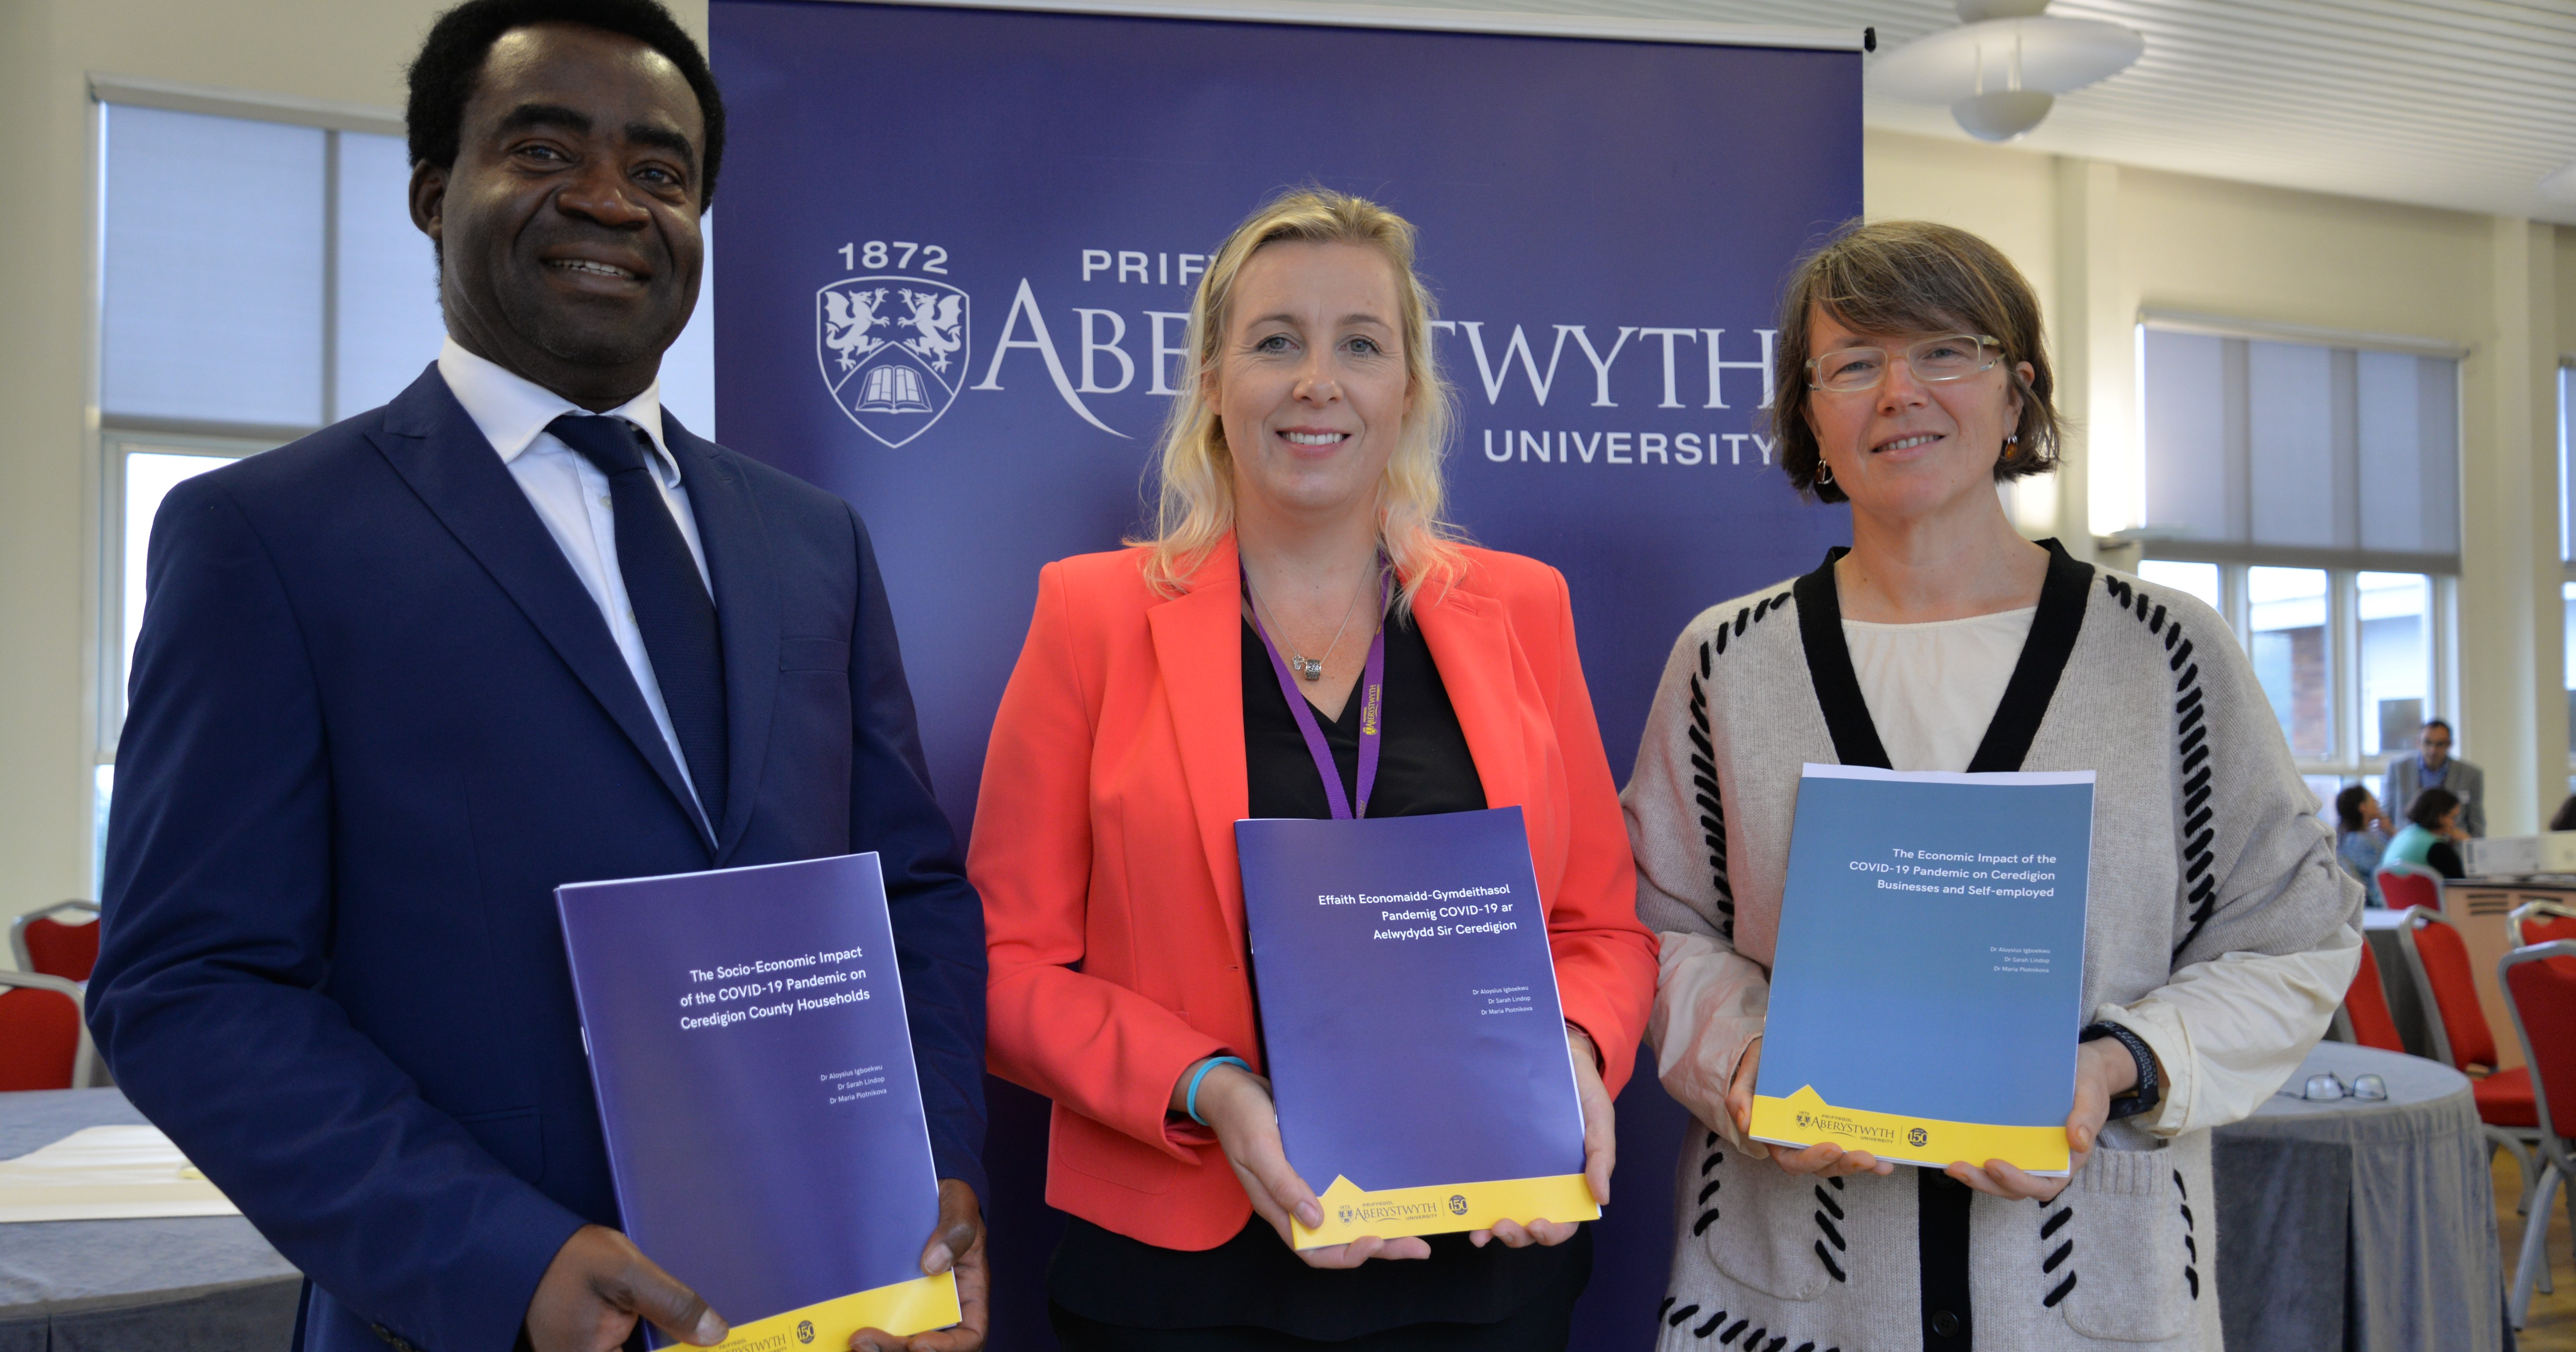 Left to right: The reports’ authors Dr Aloysius Igboekwu, Senior Lecturer in Finance and Director of Postgraduate Studies, Dr Sarah Lindop, Senior Lecturer in Finance and Dr Maria Plotnikova, Lecturer in Economics at Aberystwyth Business School.